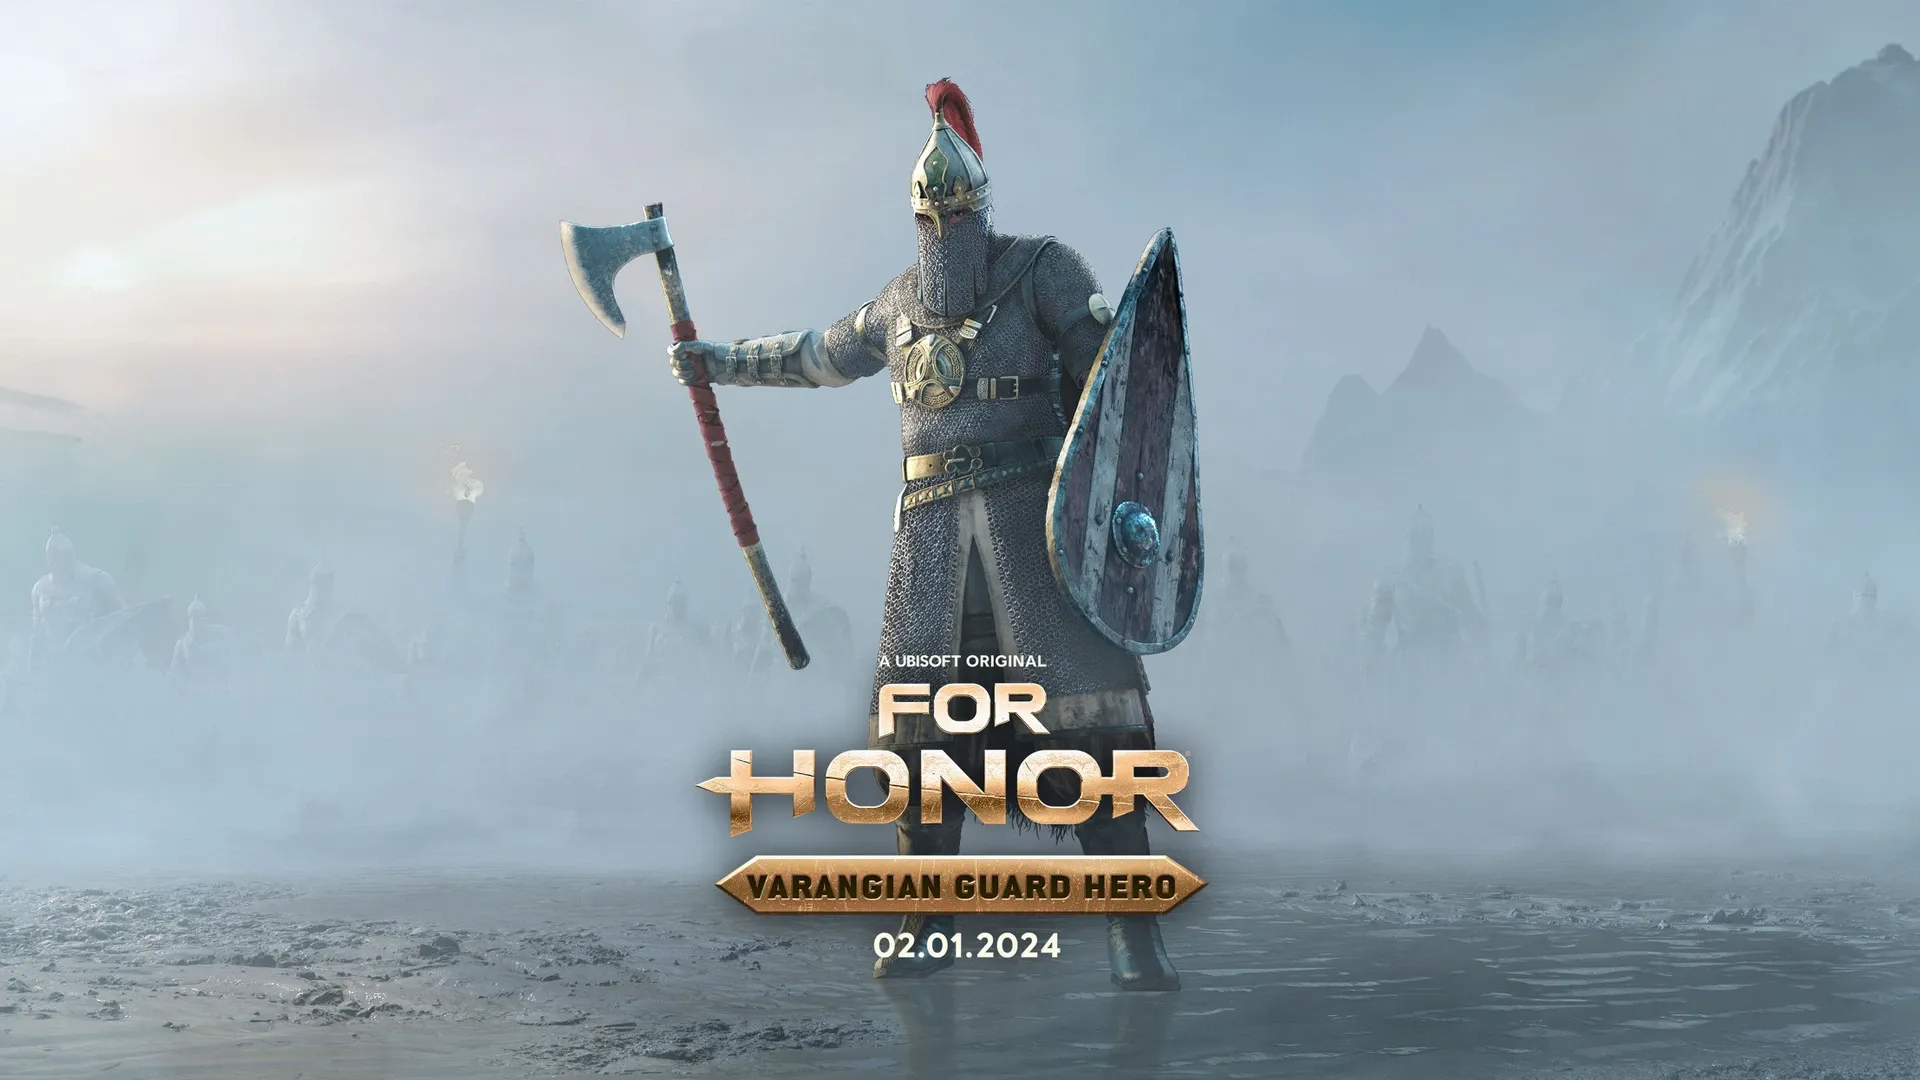 For Honor delights about 35 million players and introduces a new hero character, the Varangian Guardswoman – TestingBuddies